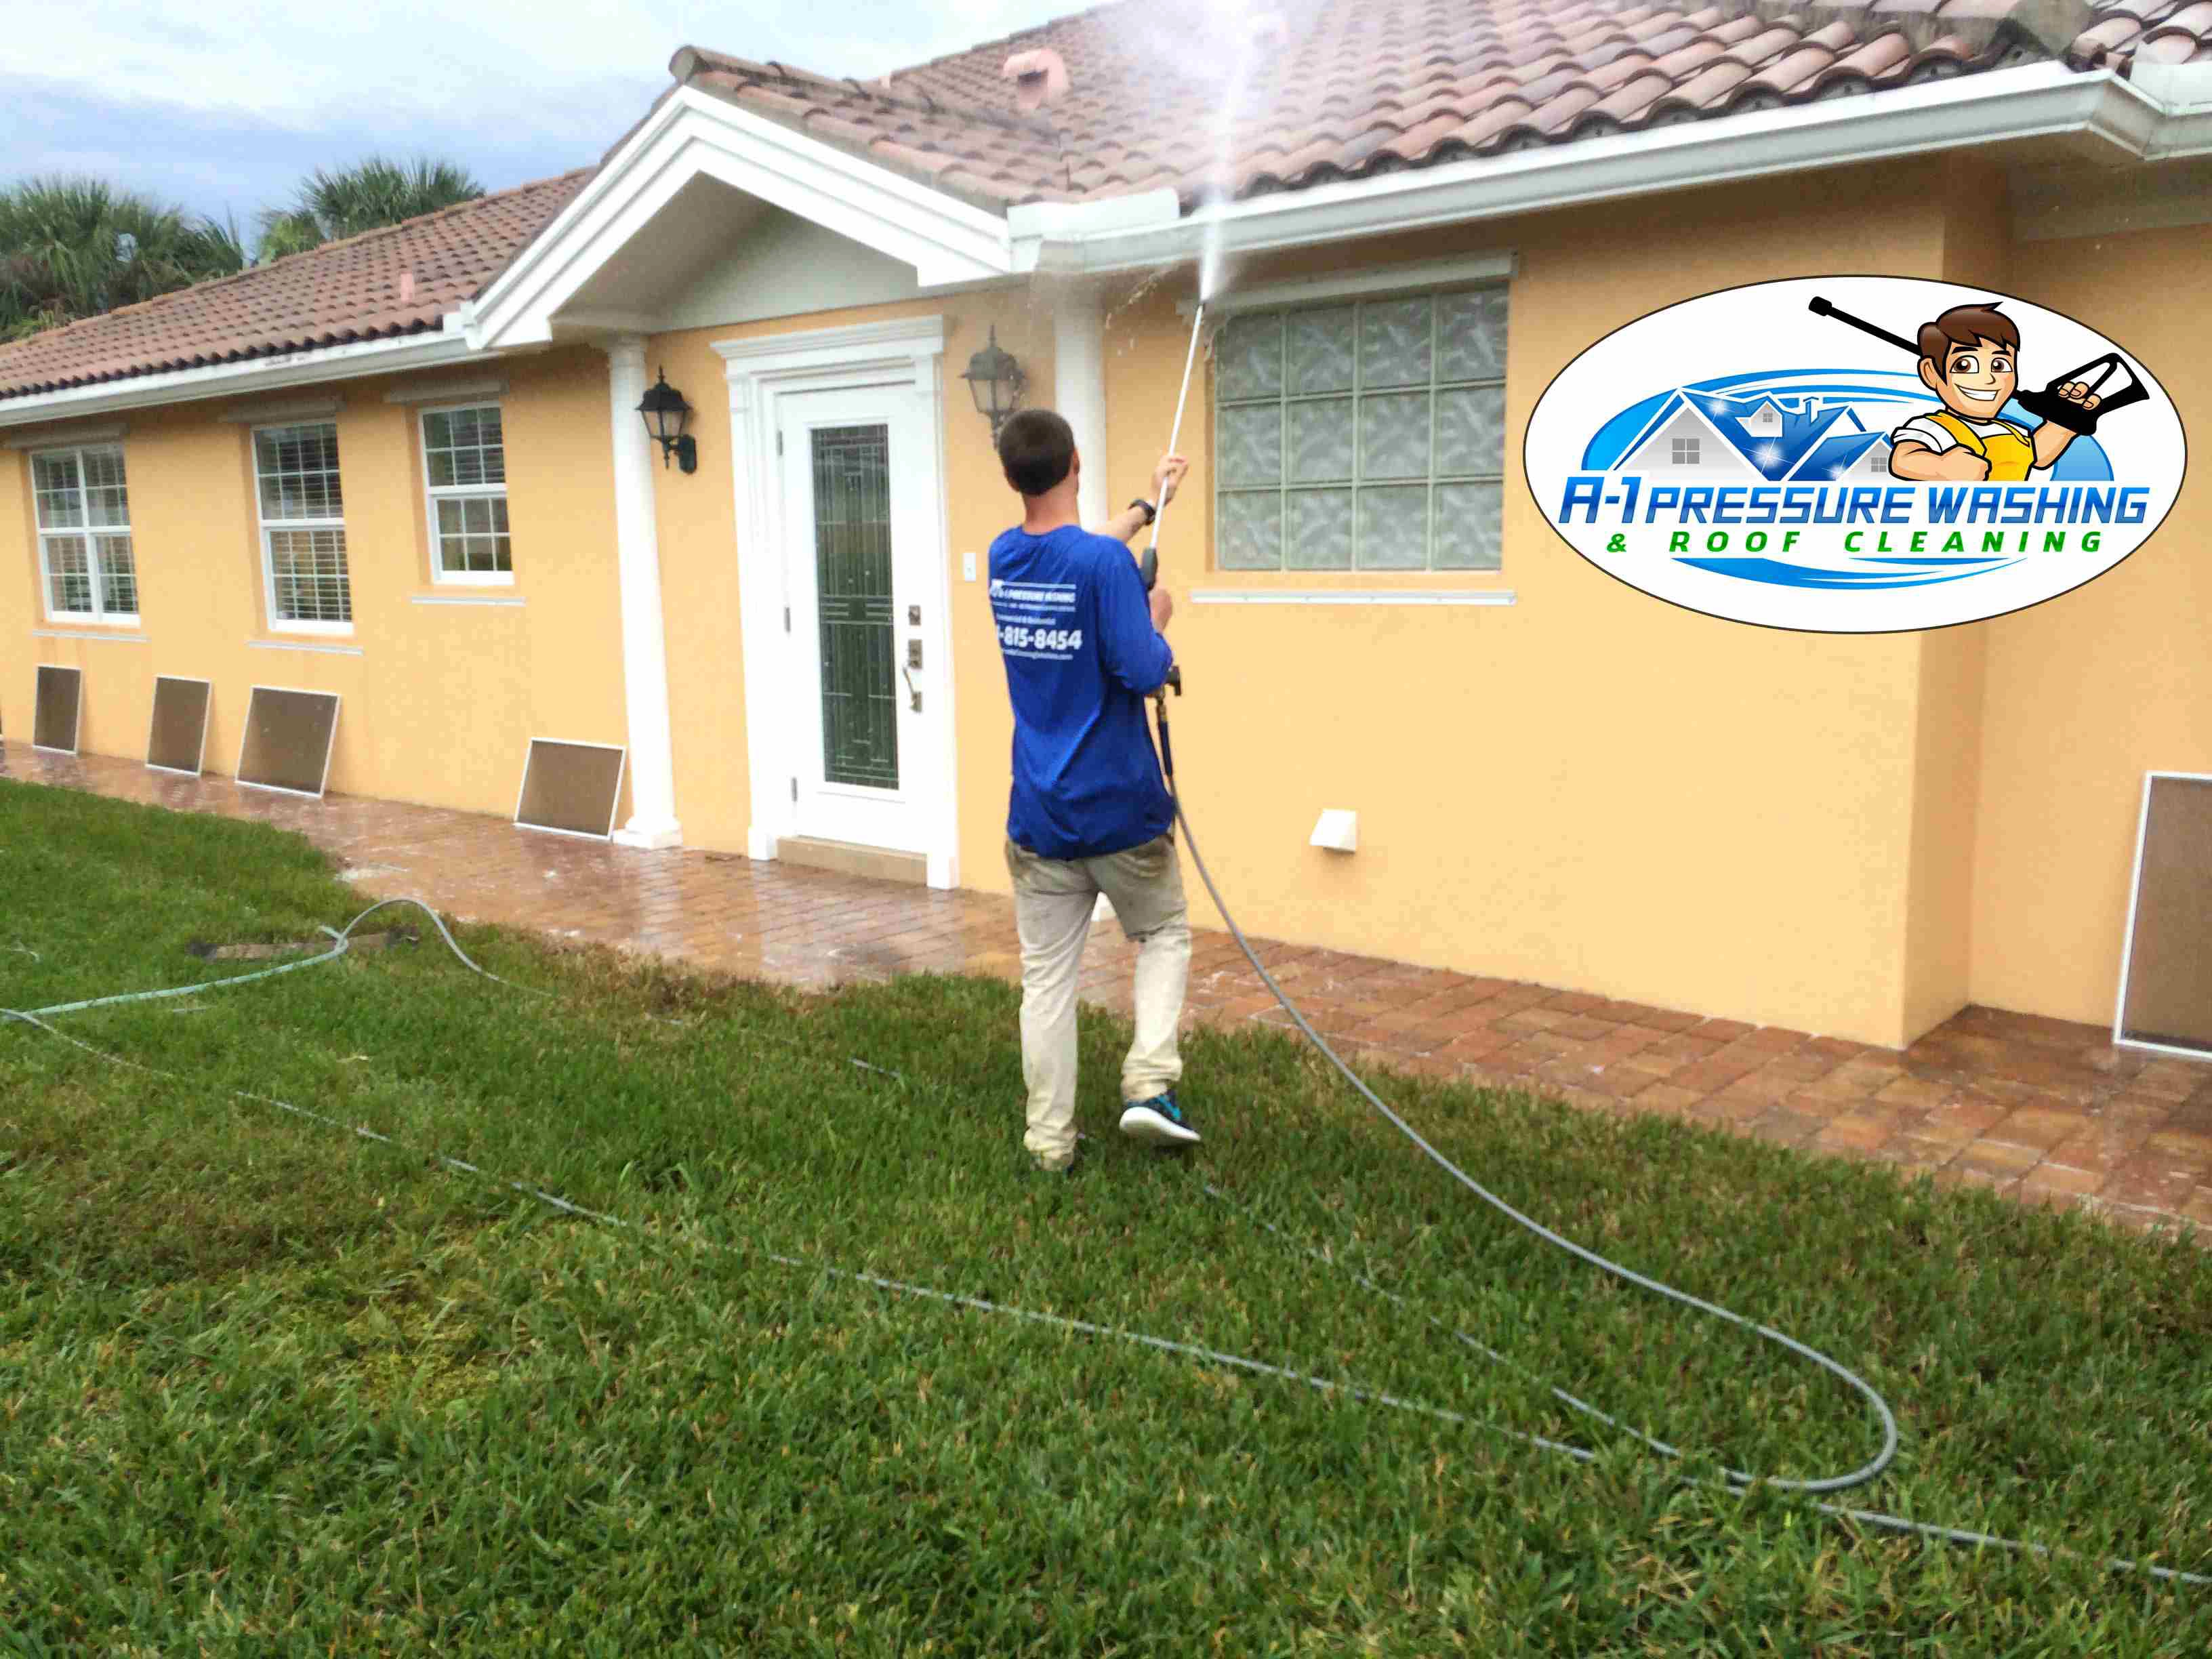 House Washing | A-1 Pressure Washing & Roof Cleaning | 941-815-8454 